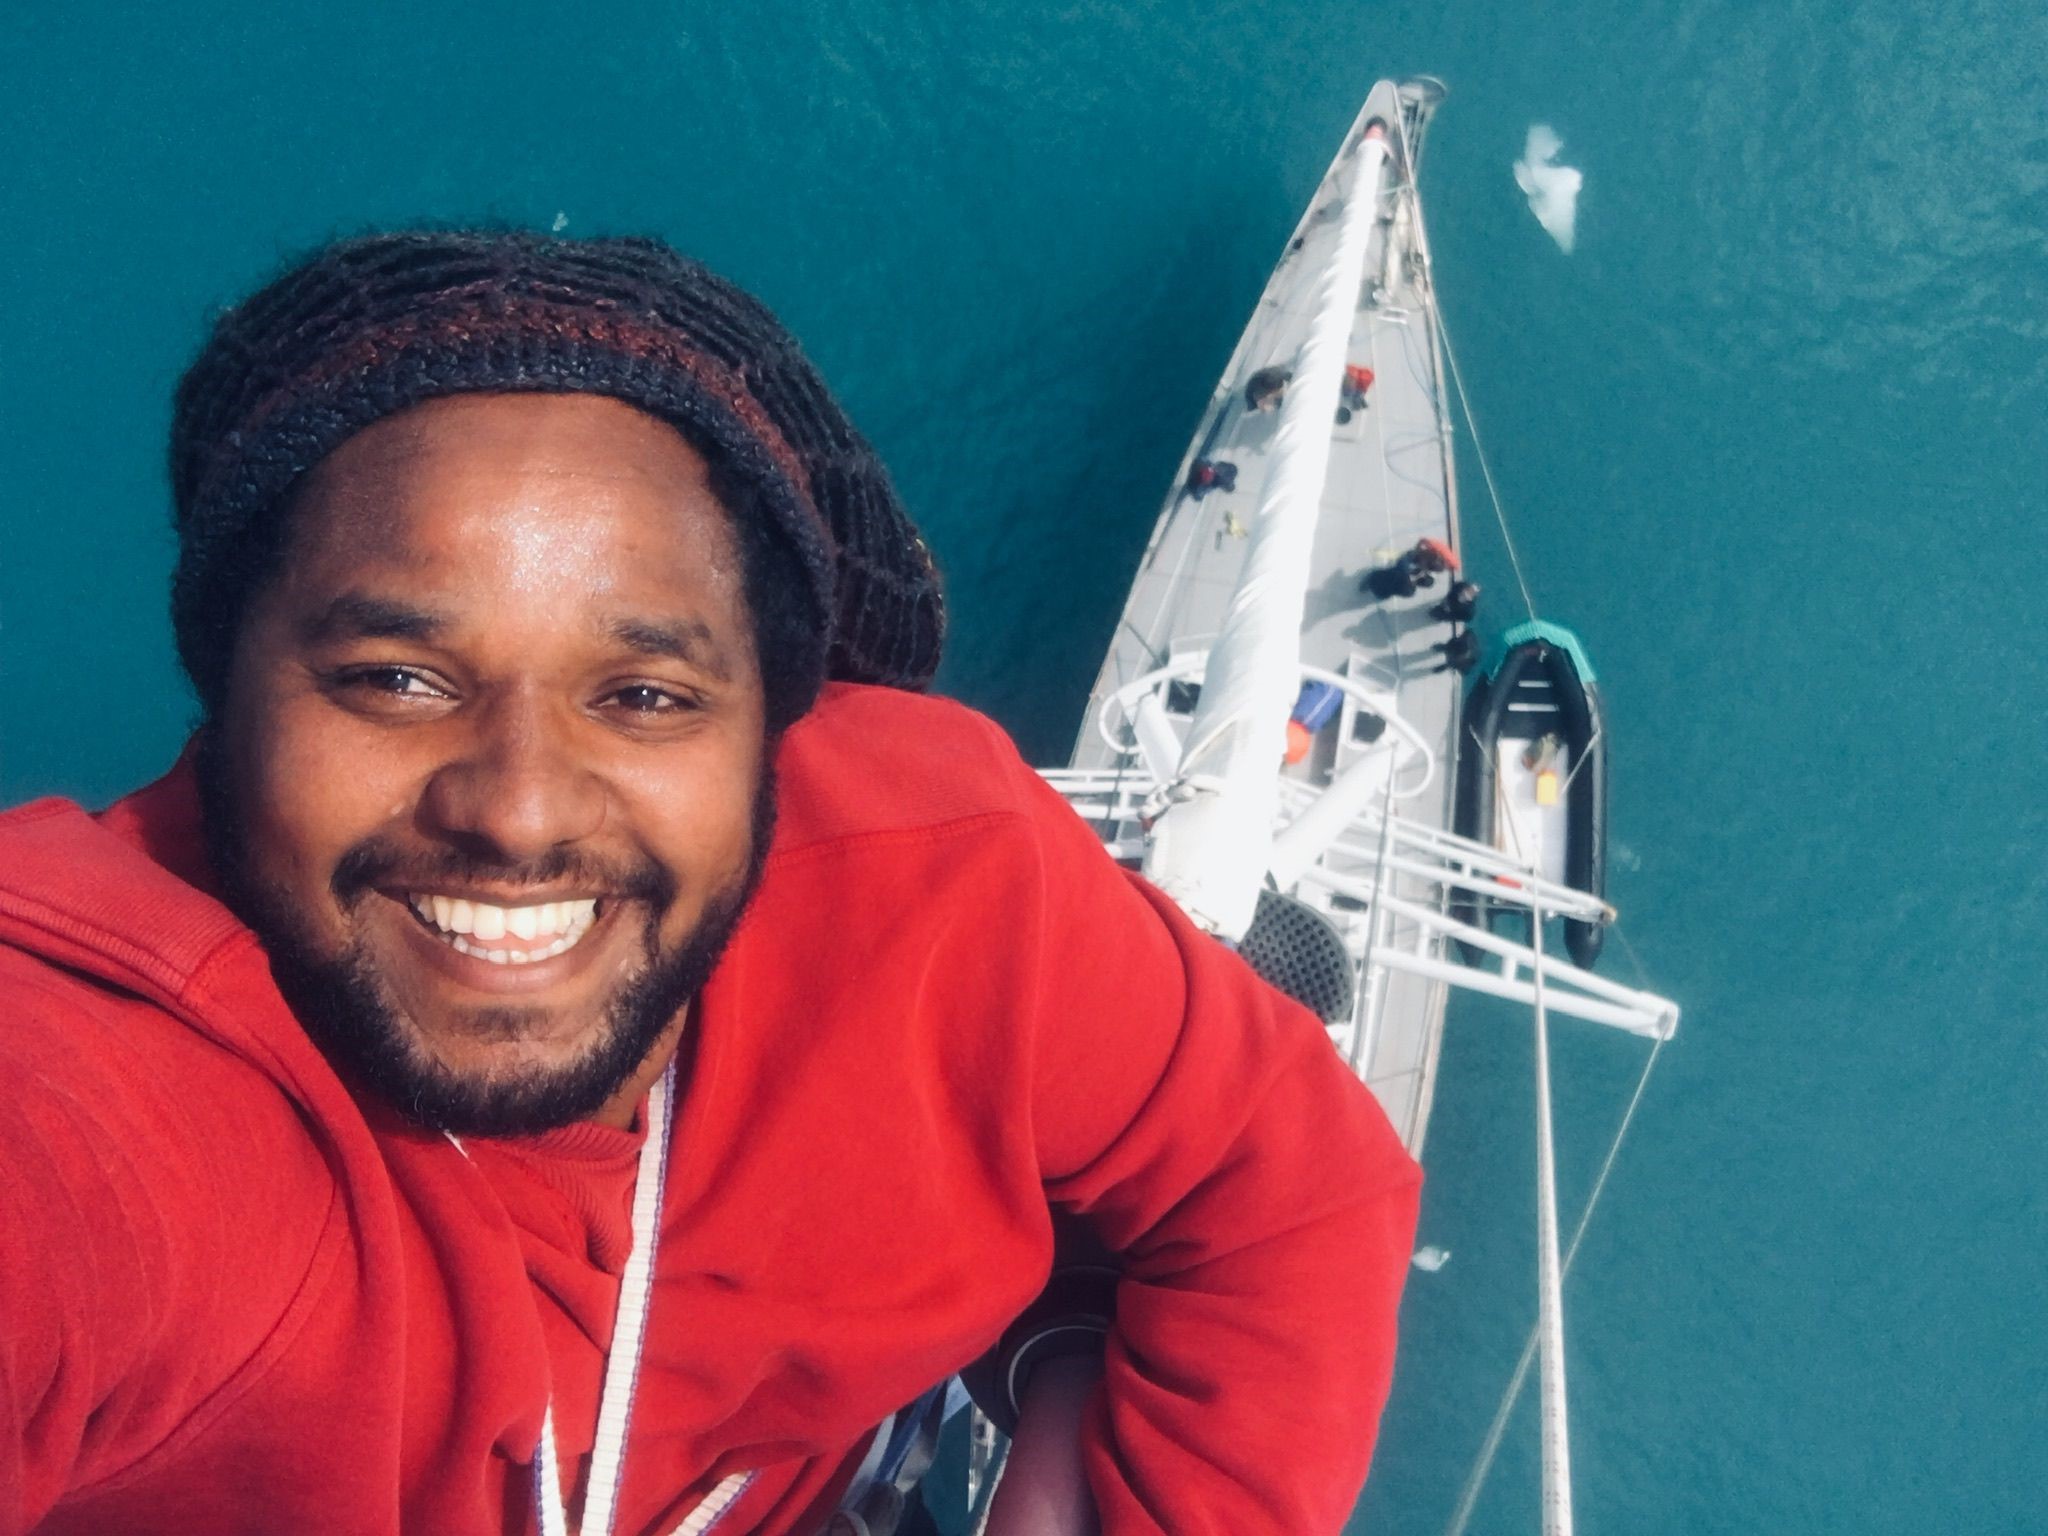 Hamza Yassin takes a selfie from the crow's nest of a boat, the hull and blue water visible in the background below.